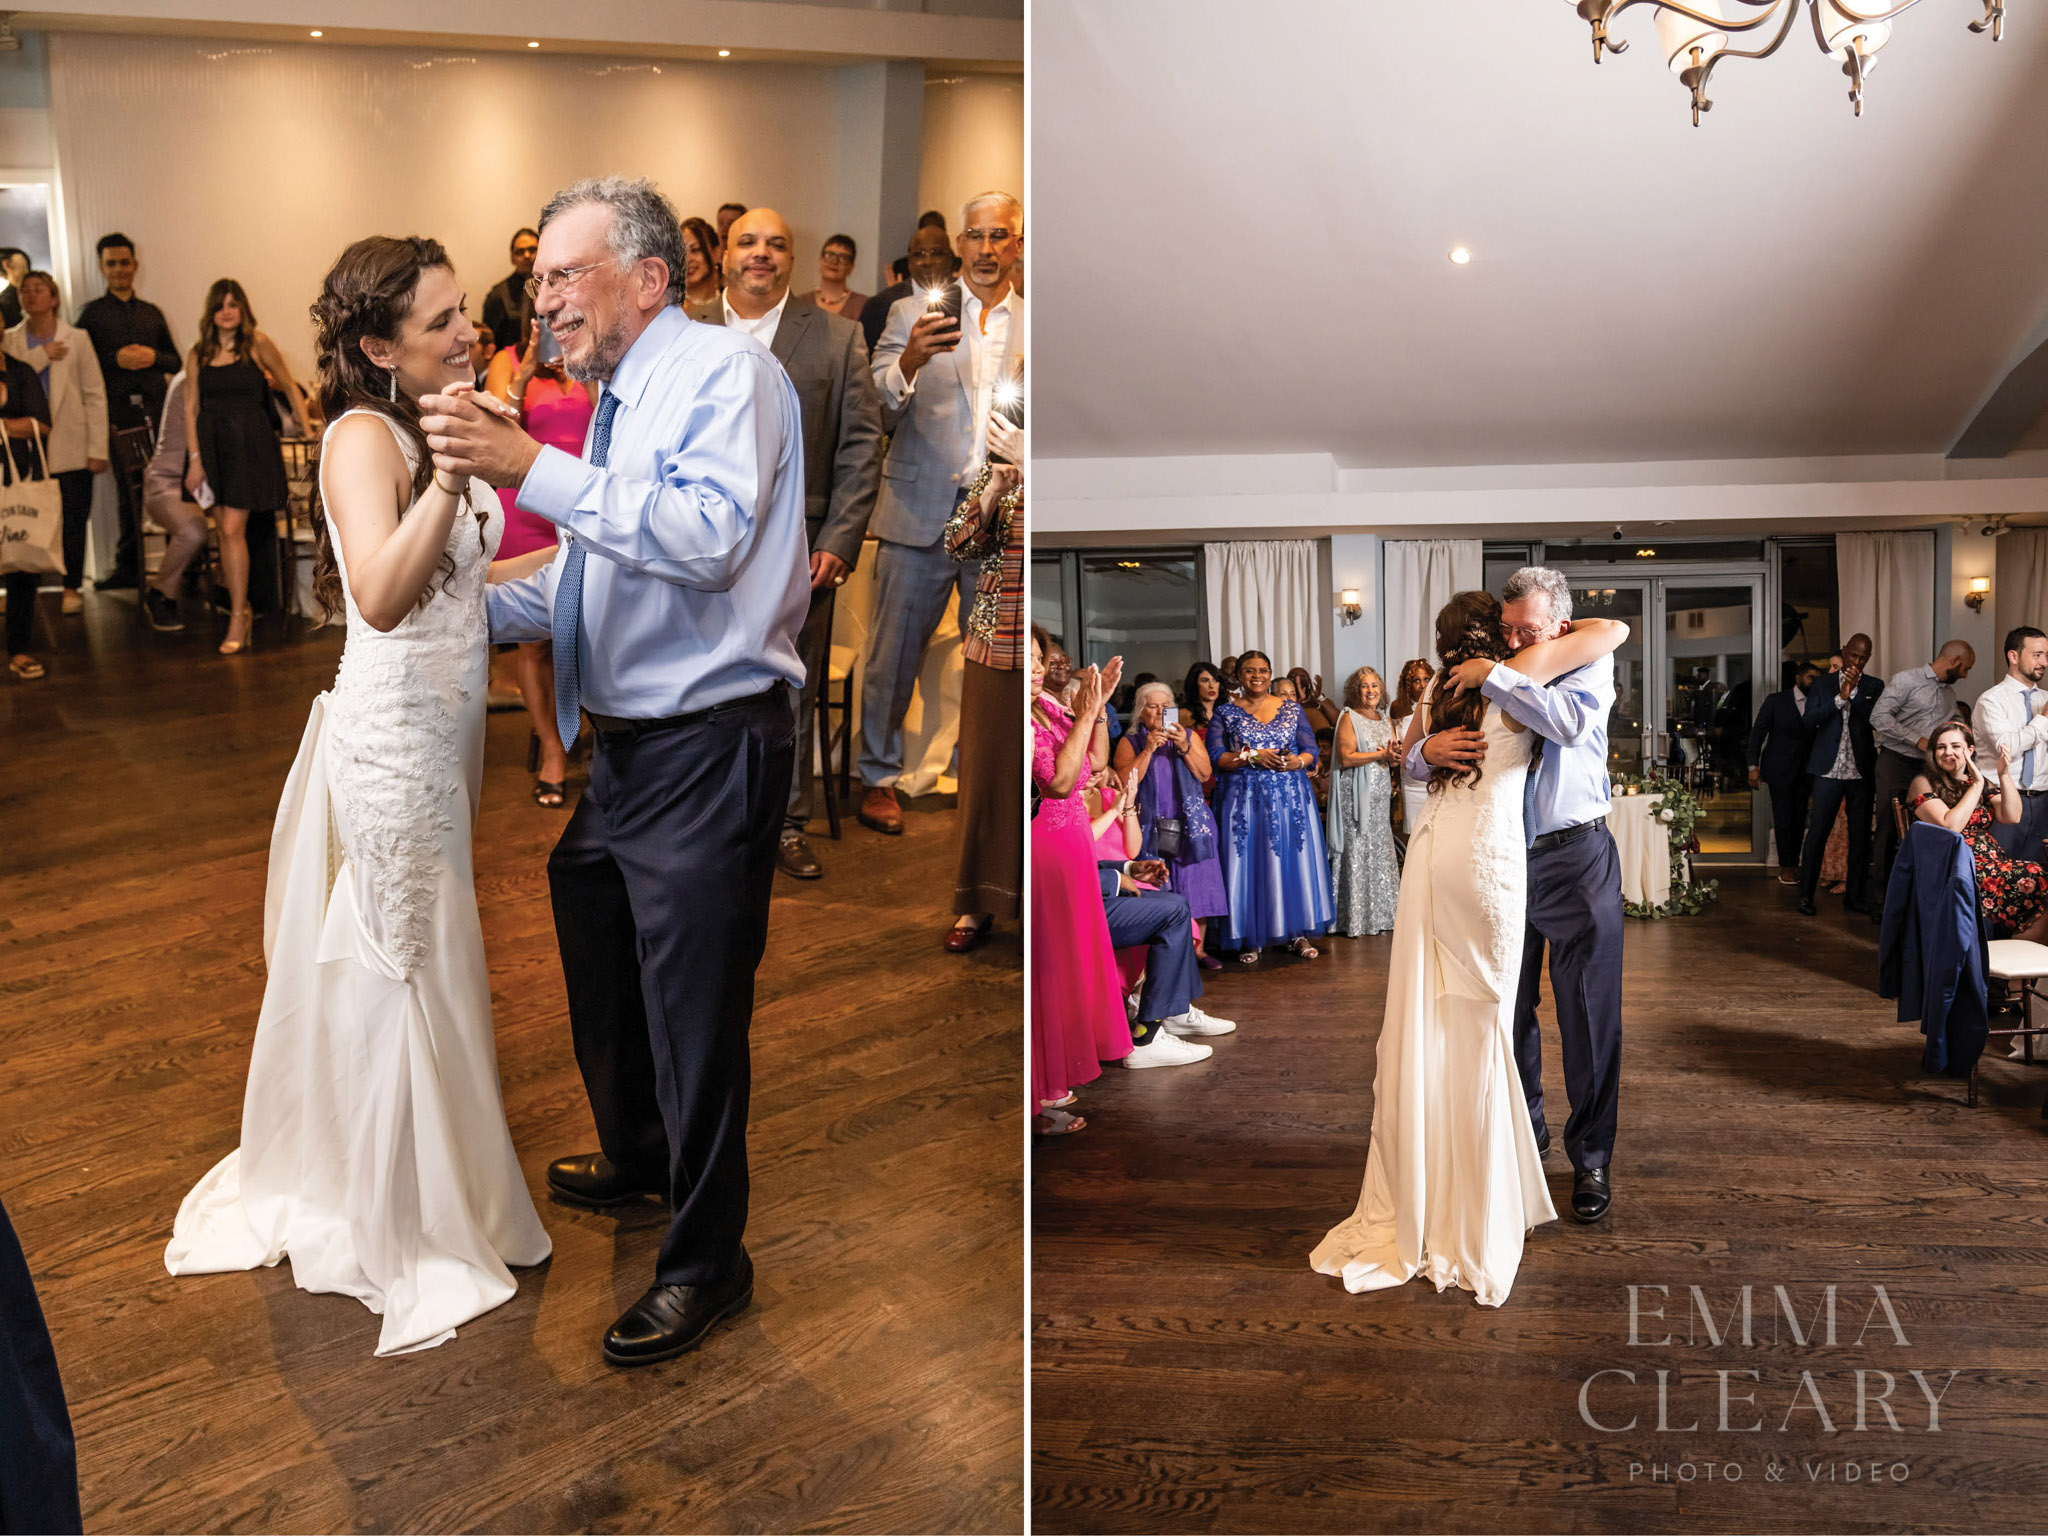 Dance of the bride and father